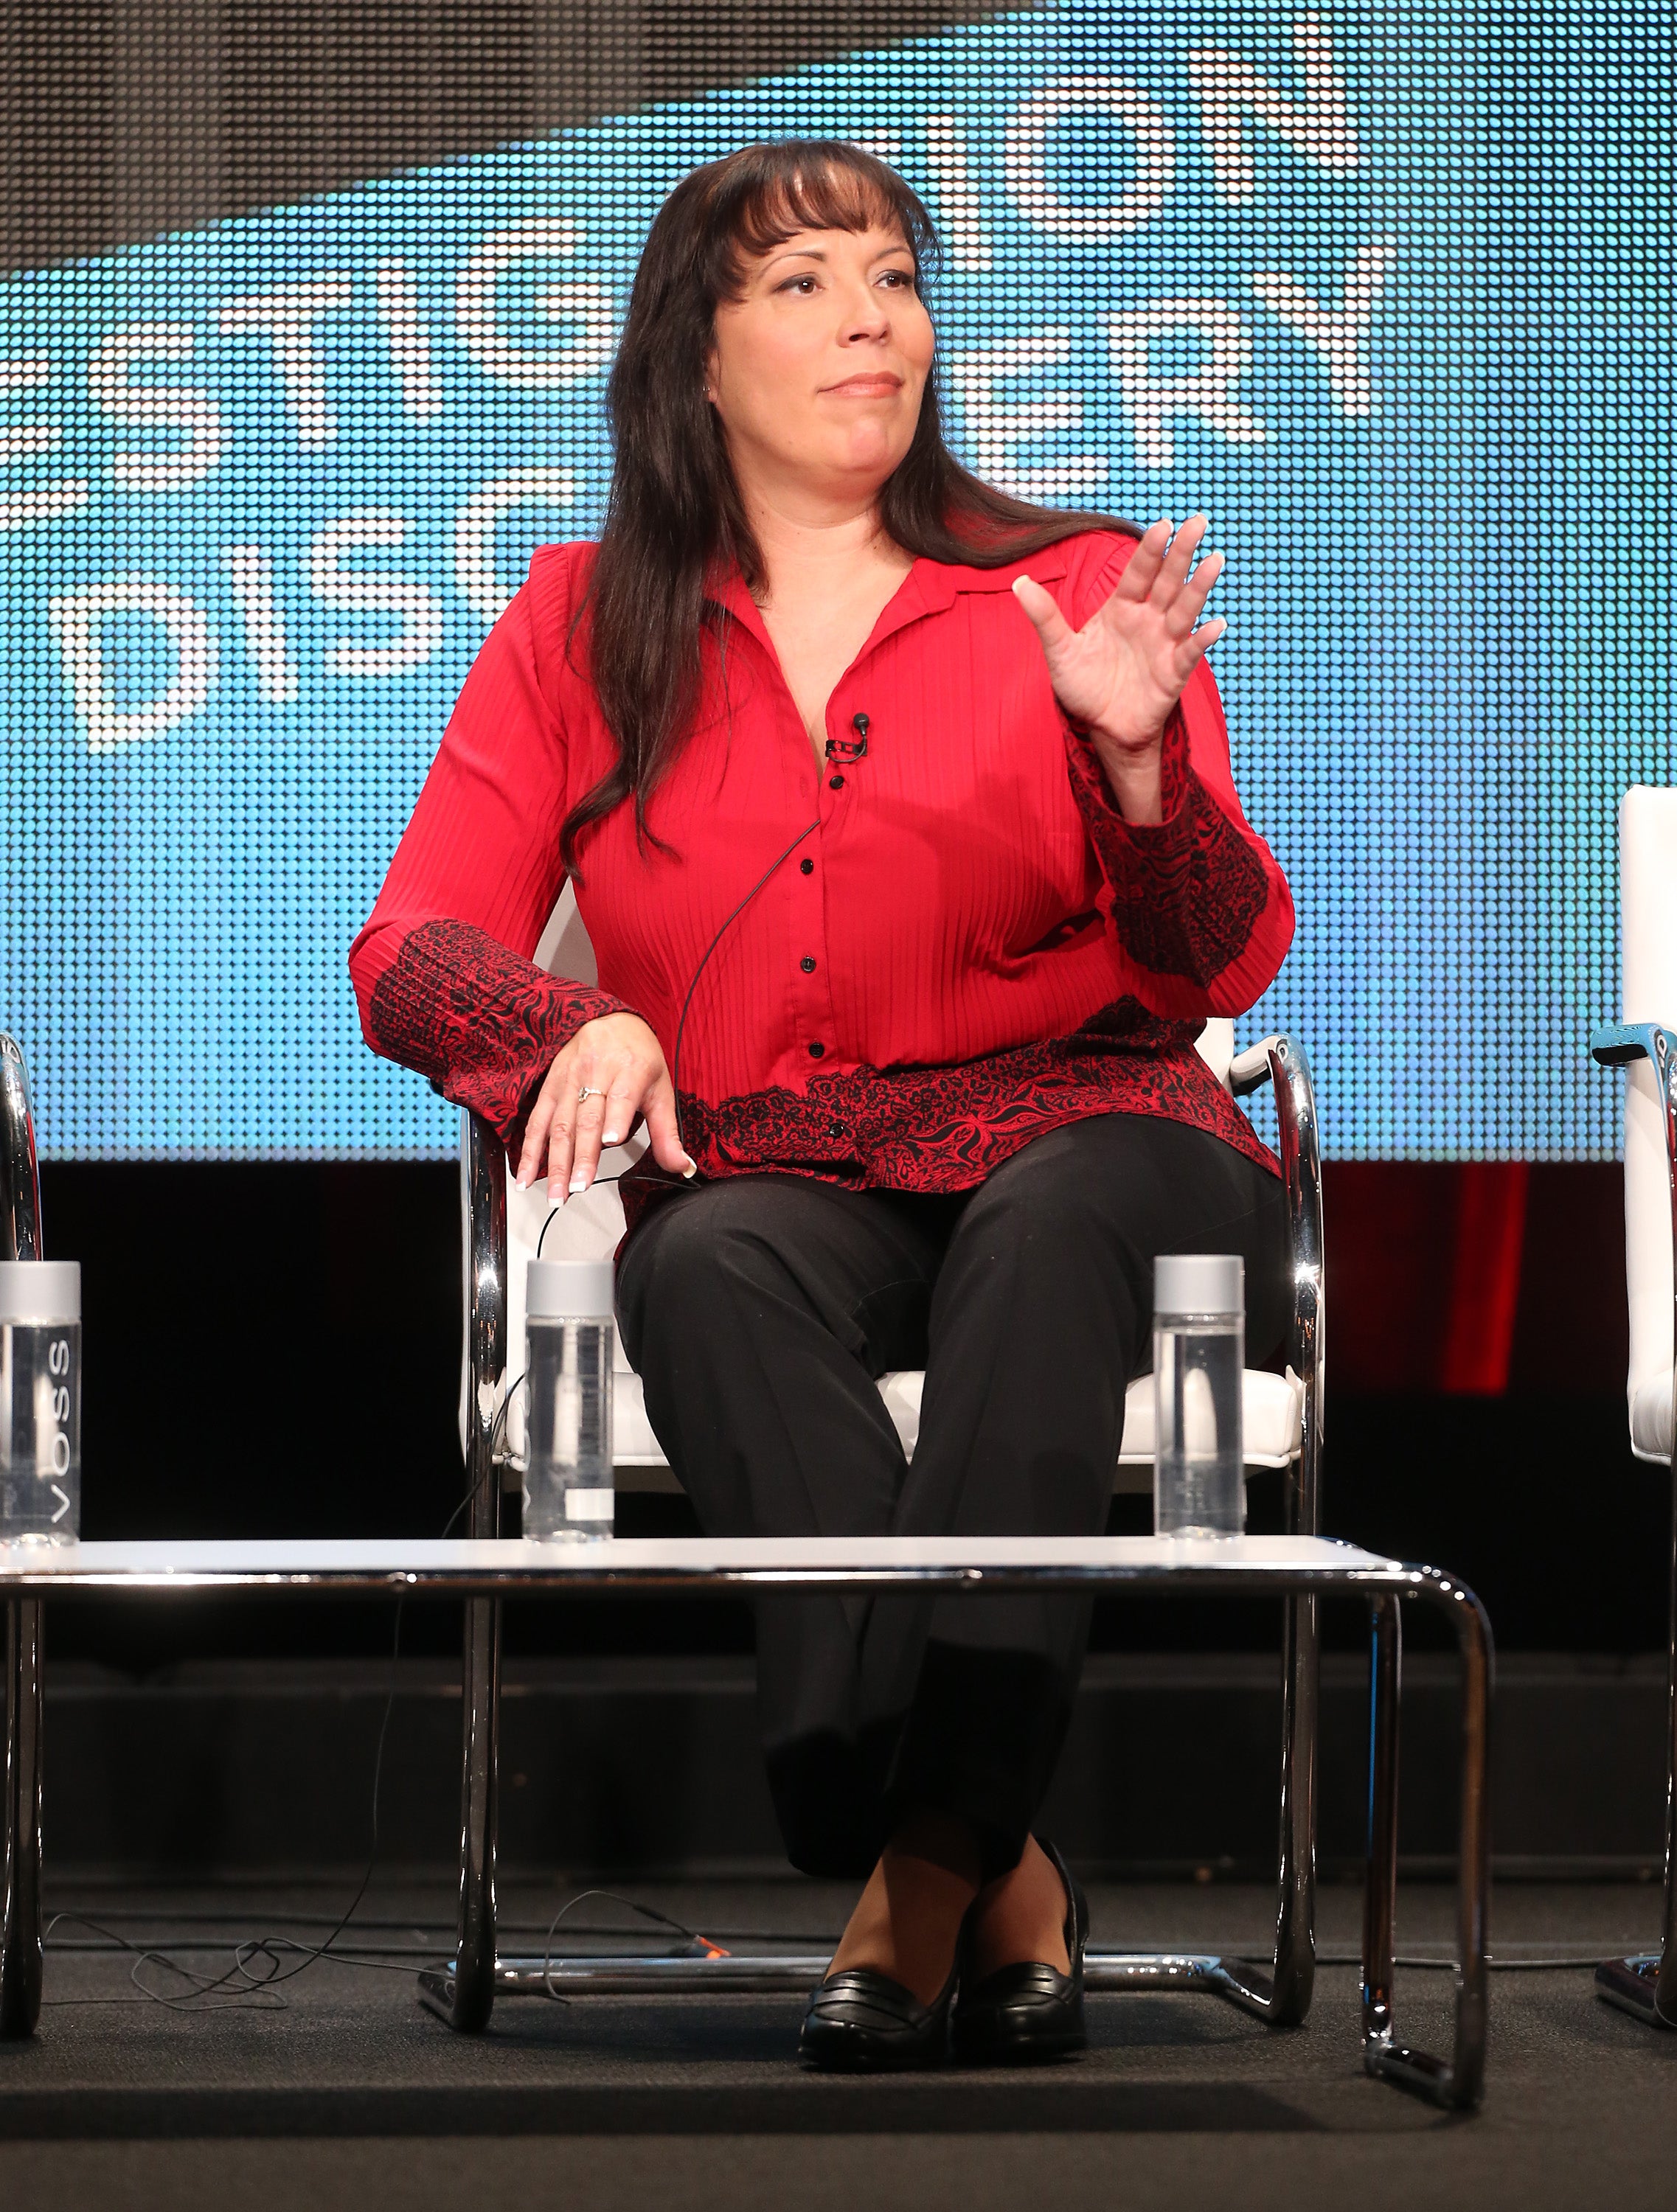 Lisa McVey Noland speaks on a panel during the Investigation Discovery portion of the 2013 Summer Television Critics Association tour on 25 July 2013 in Beverly Hills, California